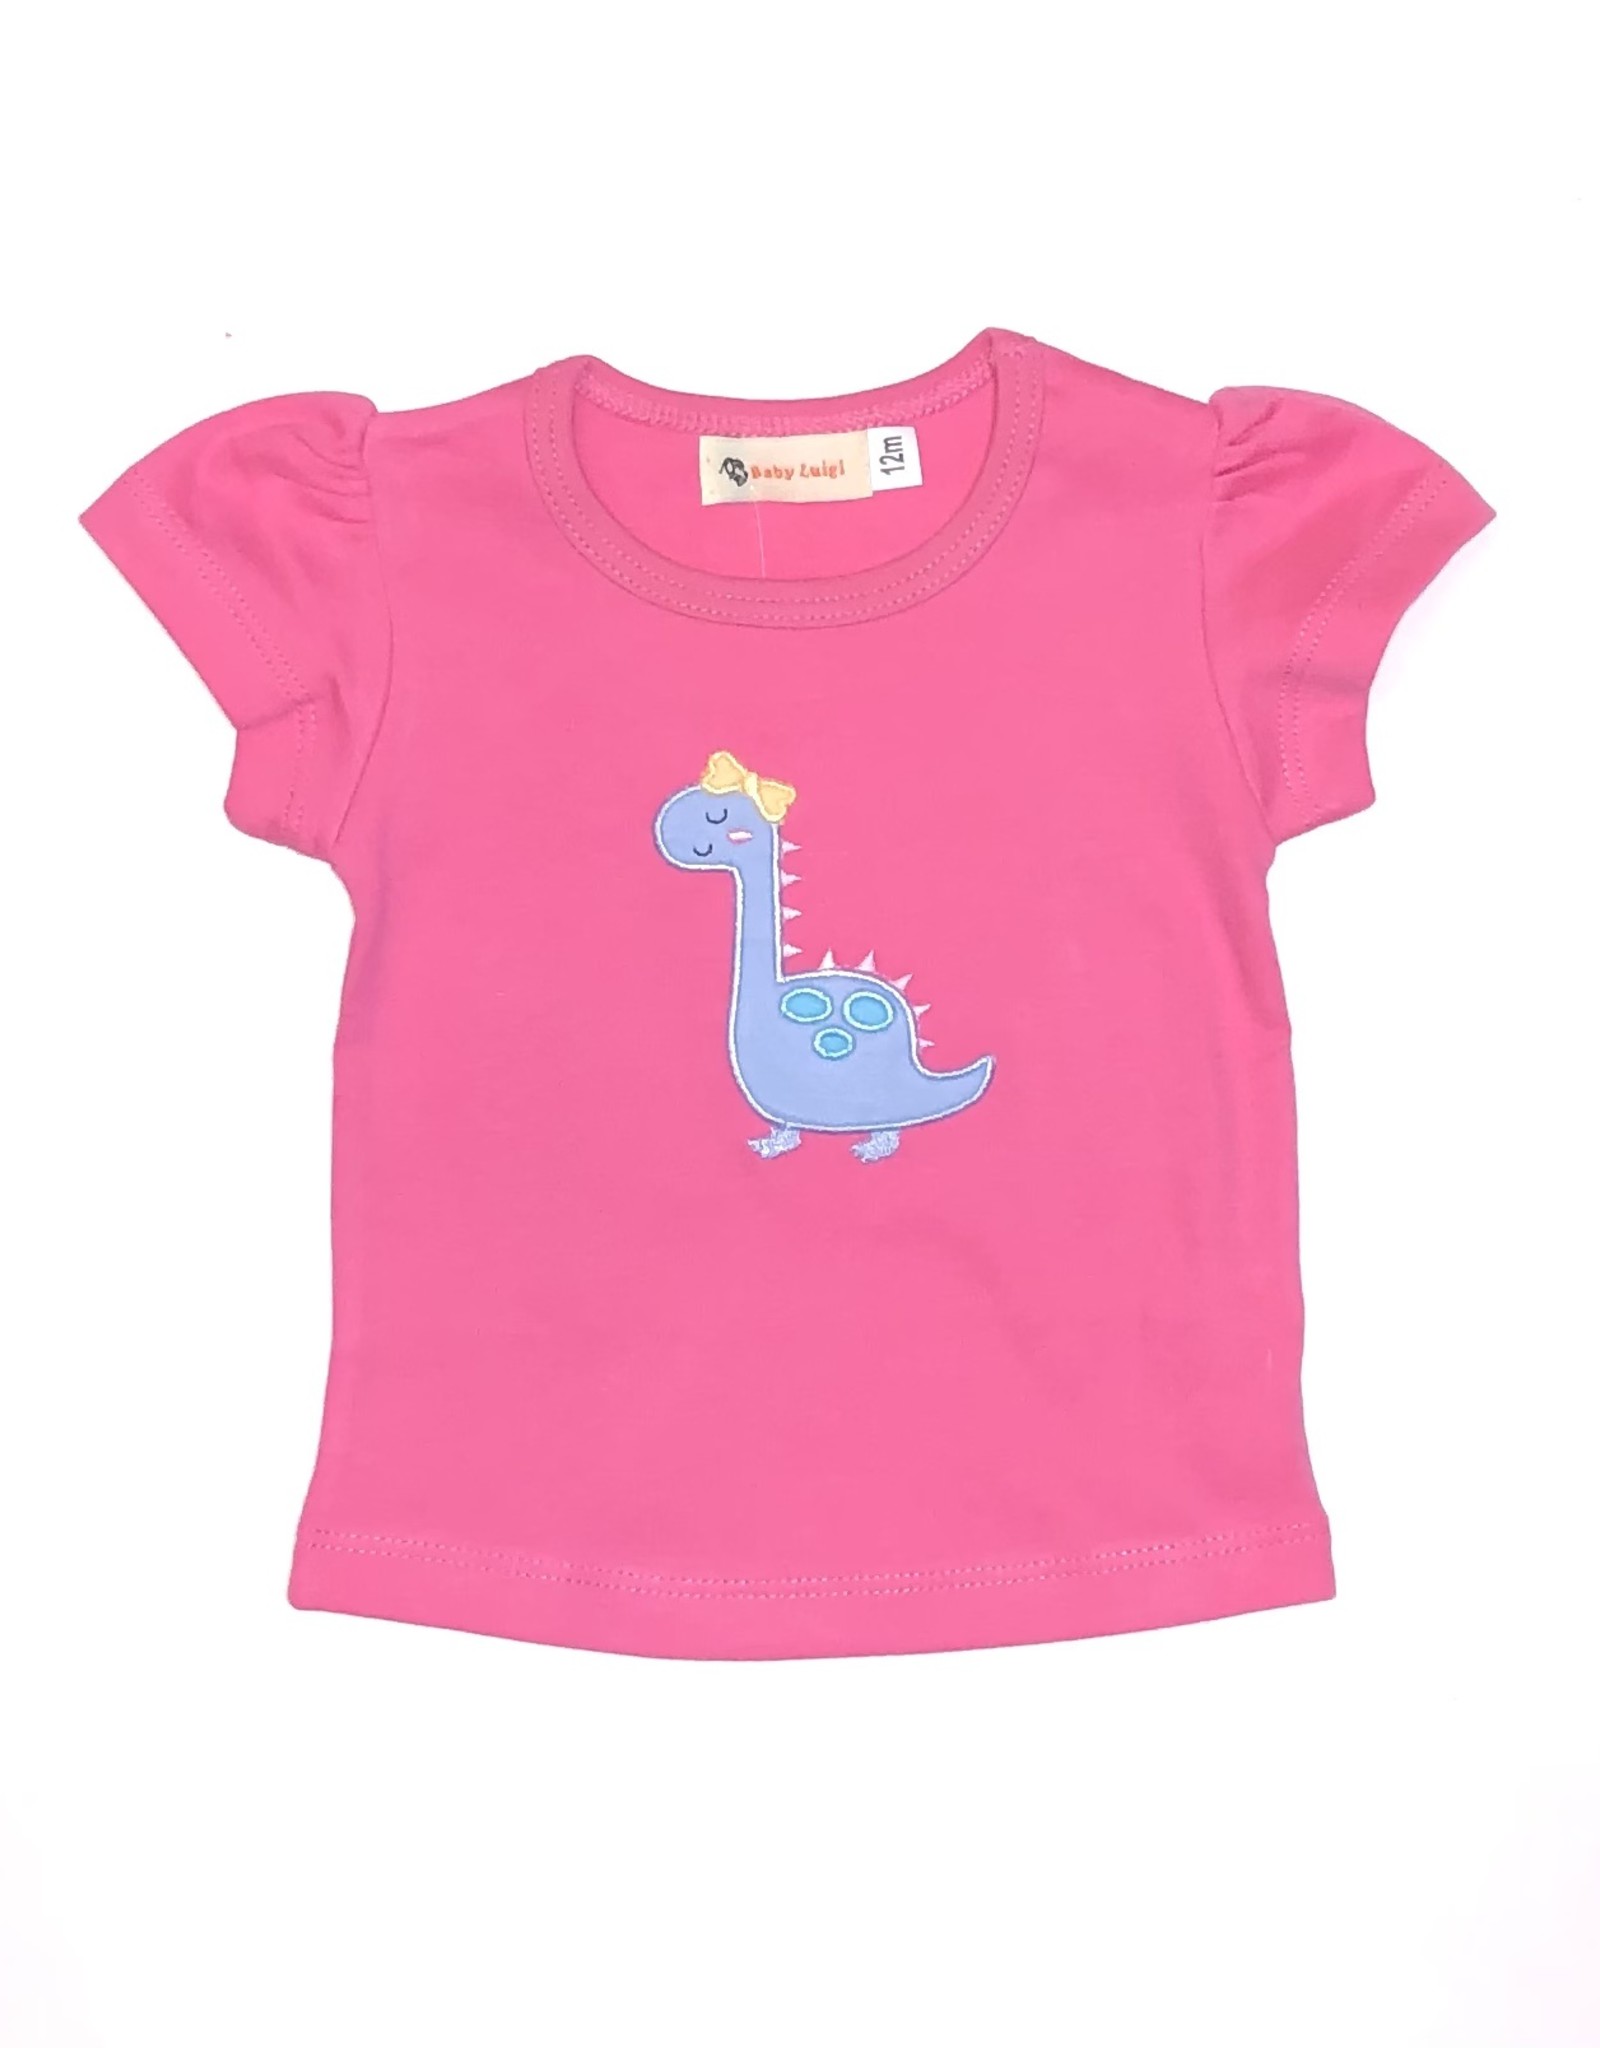 ITS148 Hot Pink Dinosaur Shirt - Spoiled Sweet Boutique